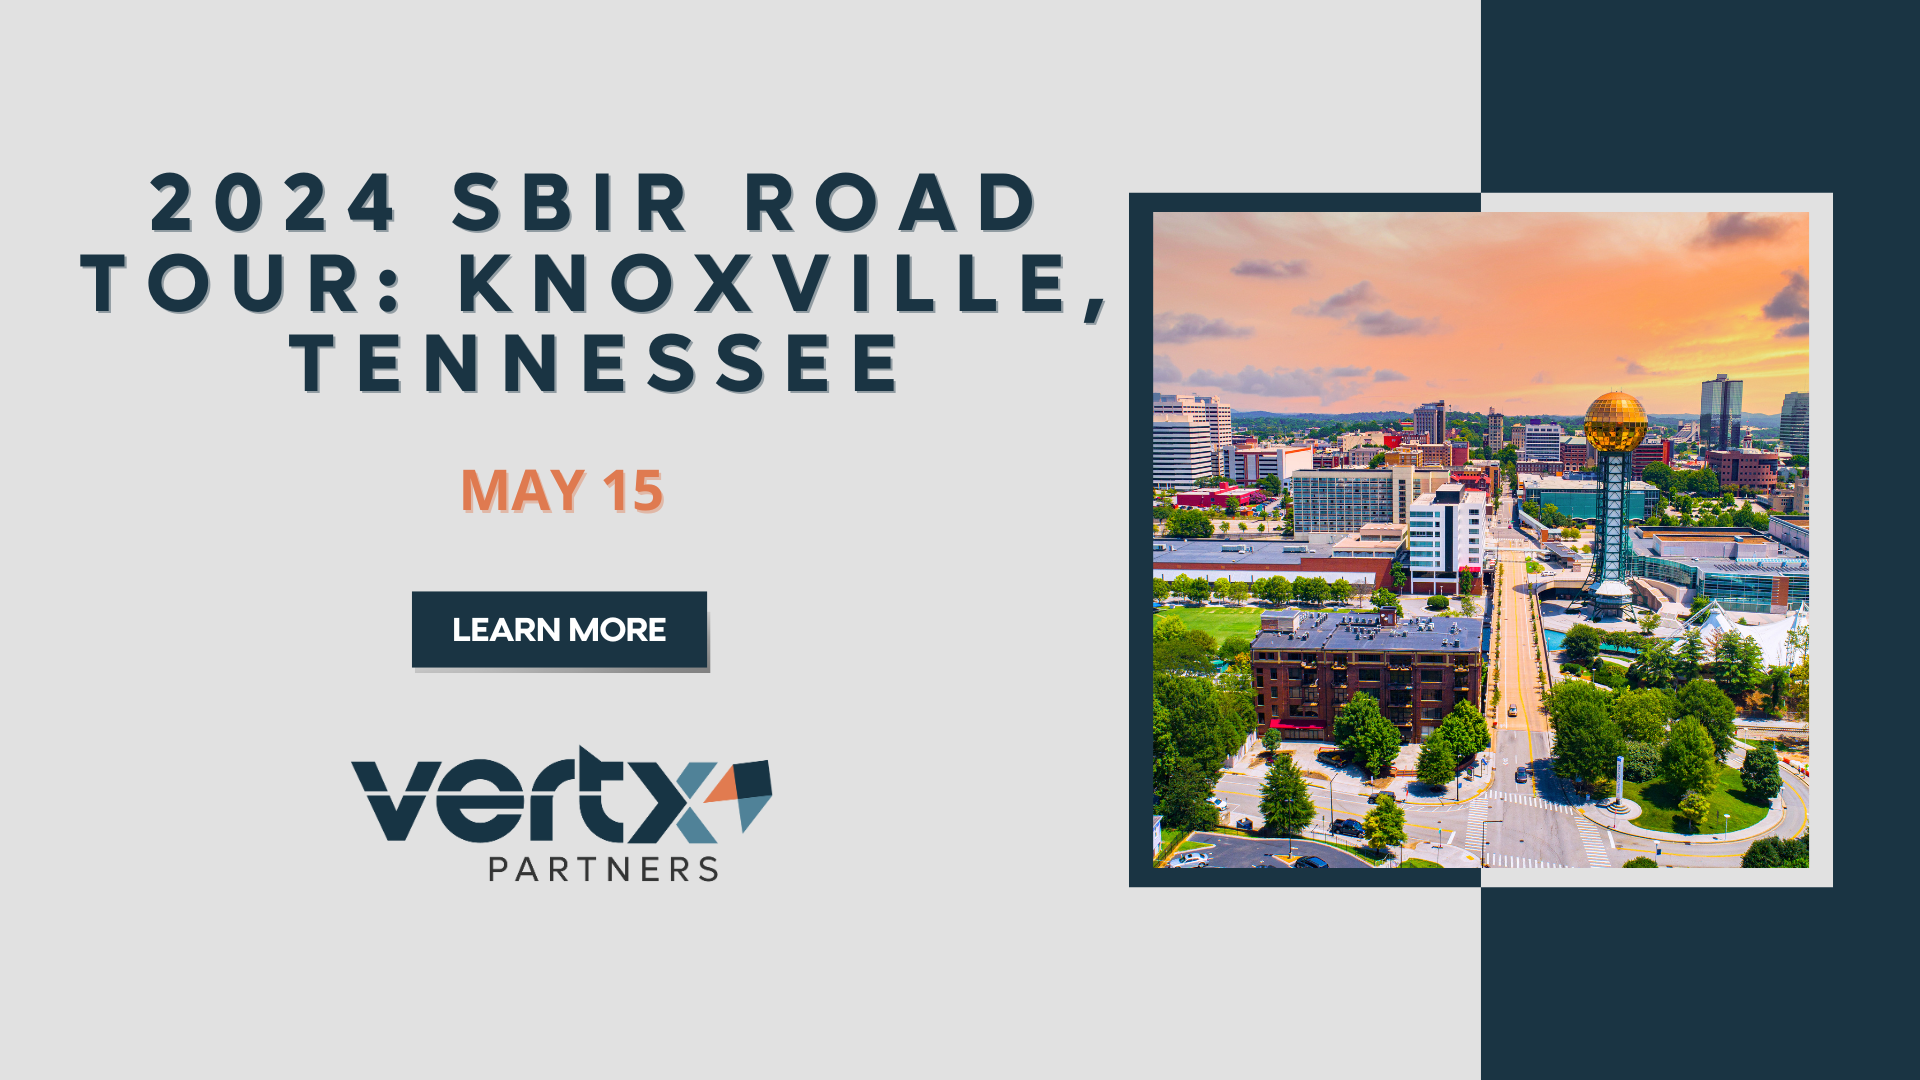 This graphic has the title 2024 SBIR Road Tour: Knoxville, Tennessee with the date may 15th under it a photo of knoxville tennessee downtown during sunsent